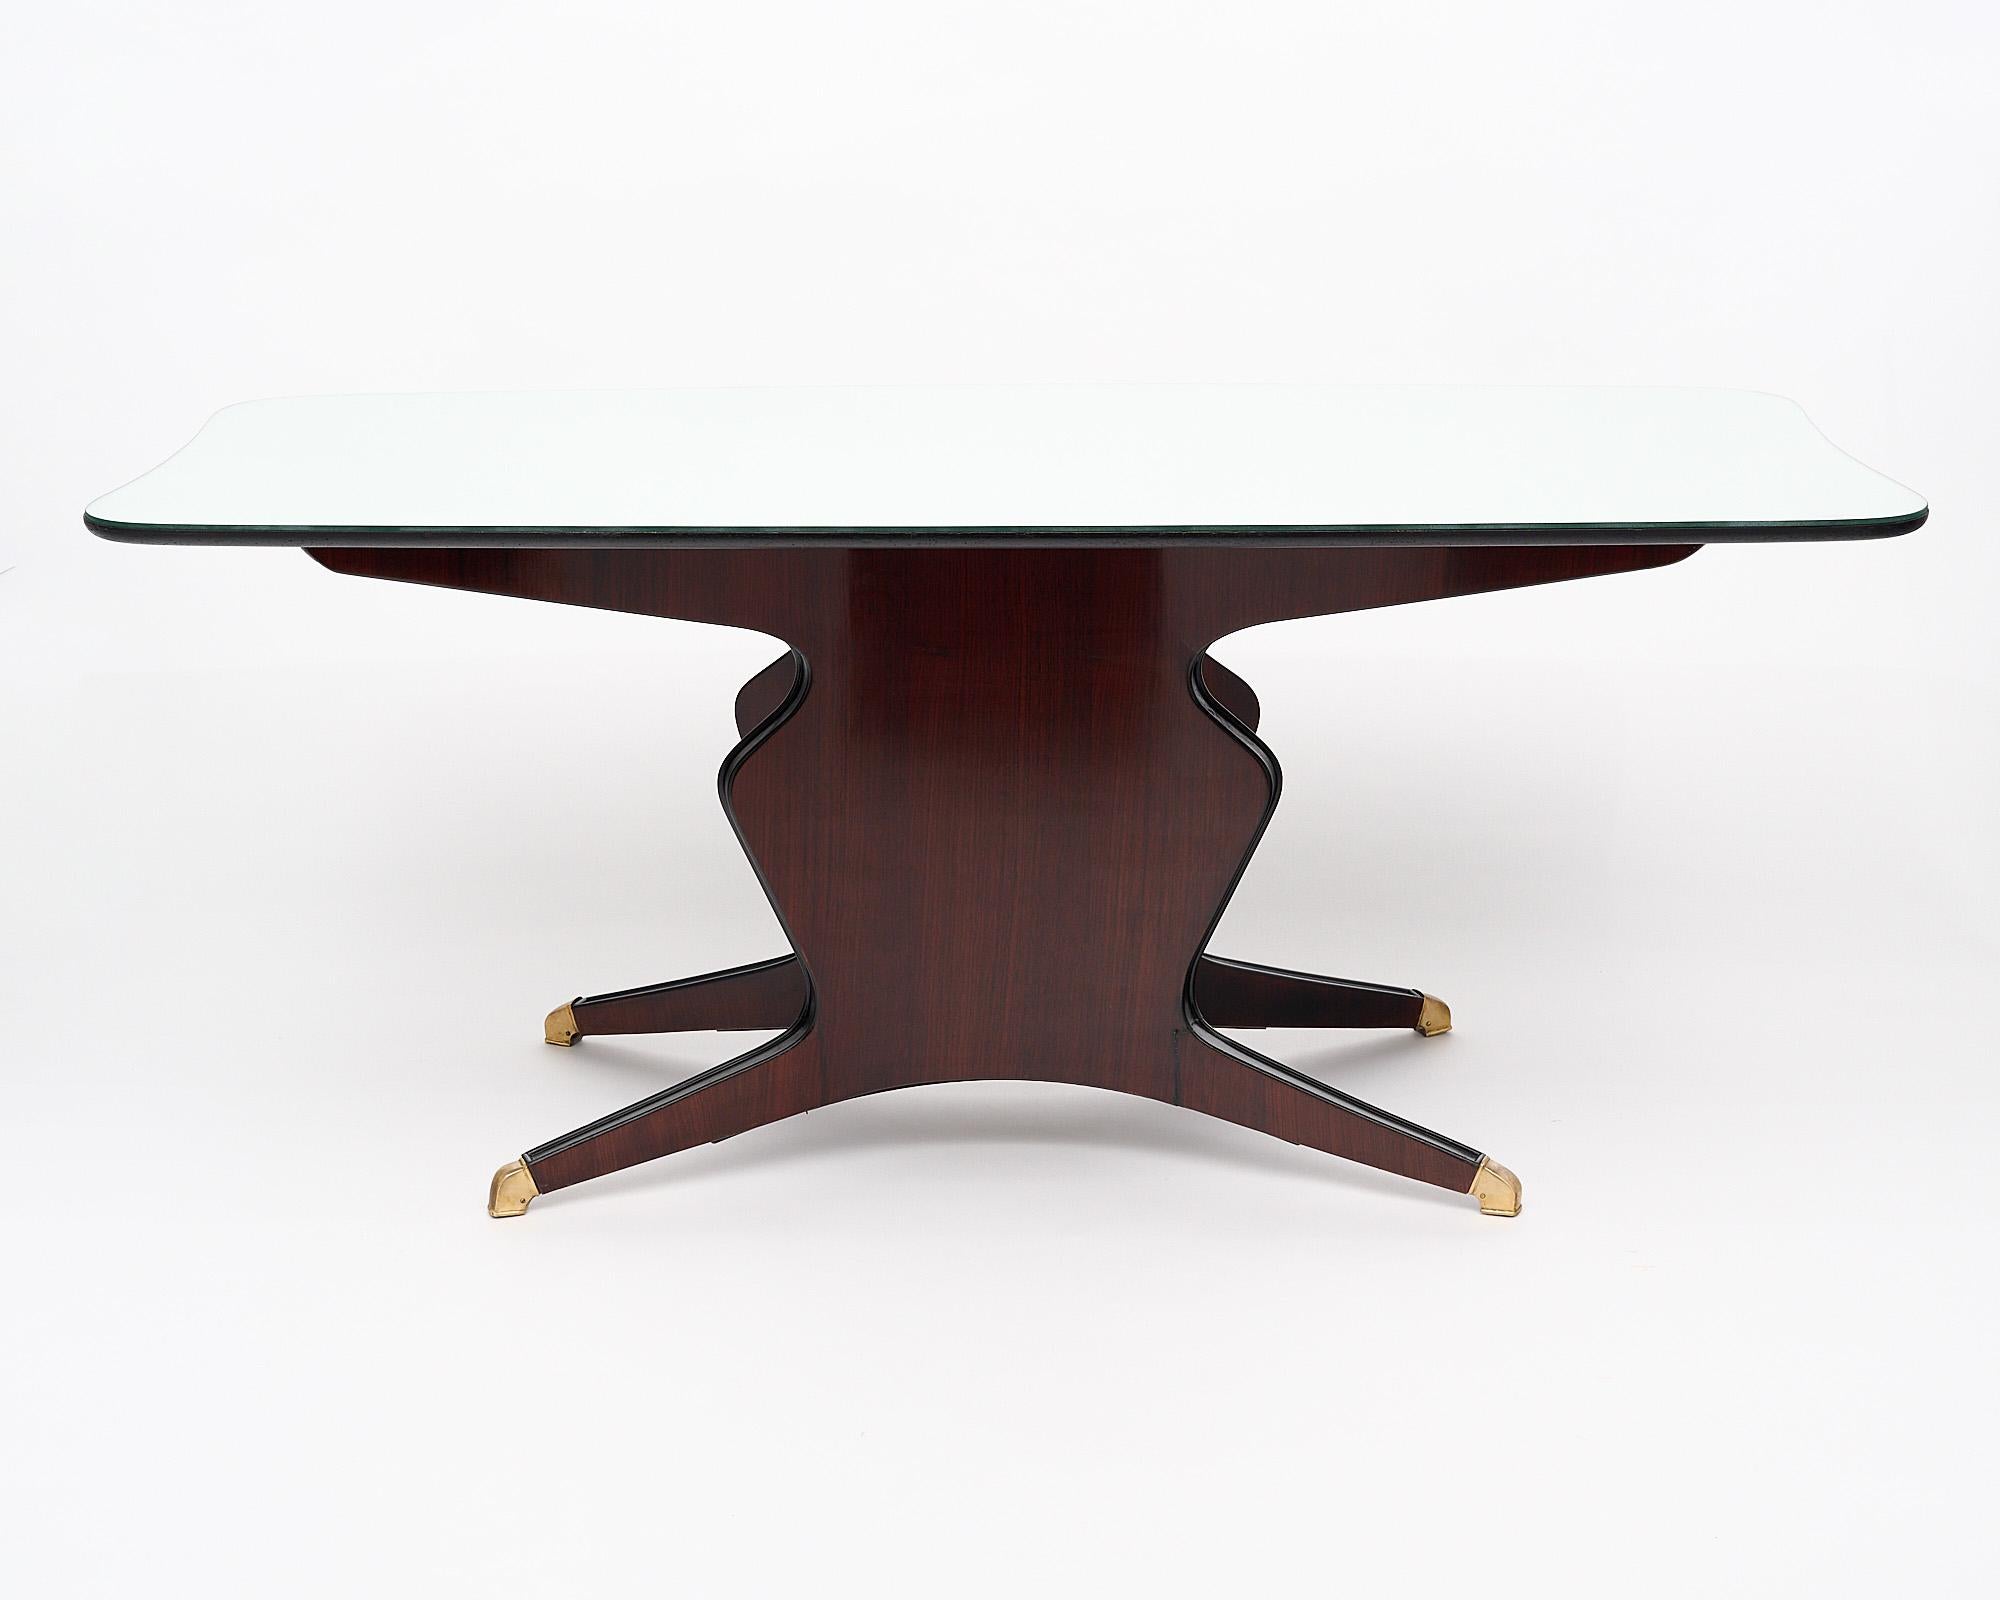 Dining room table, Italian, by iconic designer Osvaldo Borsani. The top is mirrored while the uniquely shaped base, which sits on four legs with four bronze feet, is finished in a lustrous Museum quality French polish.